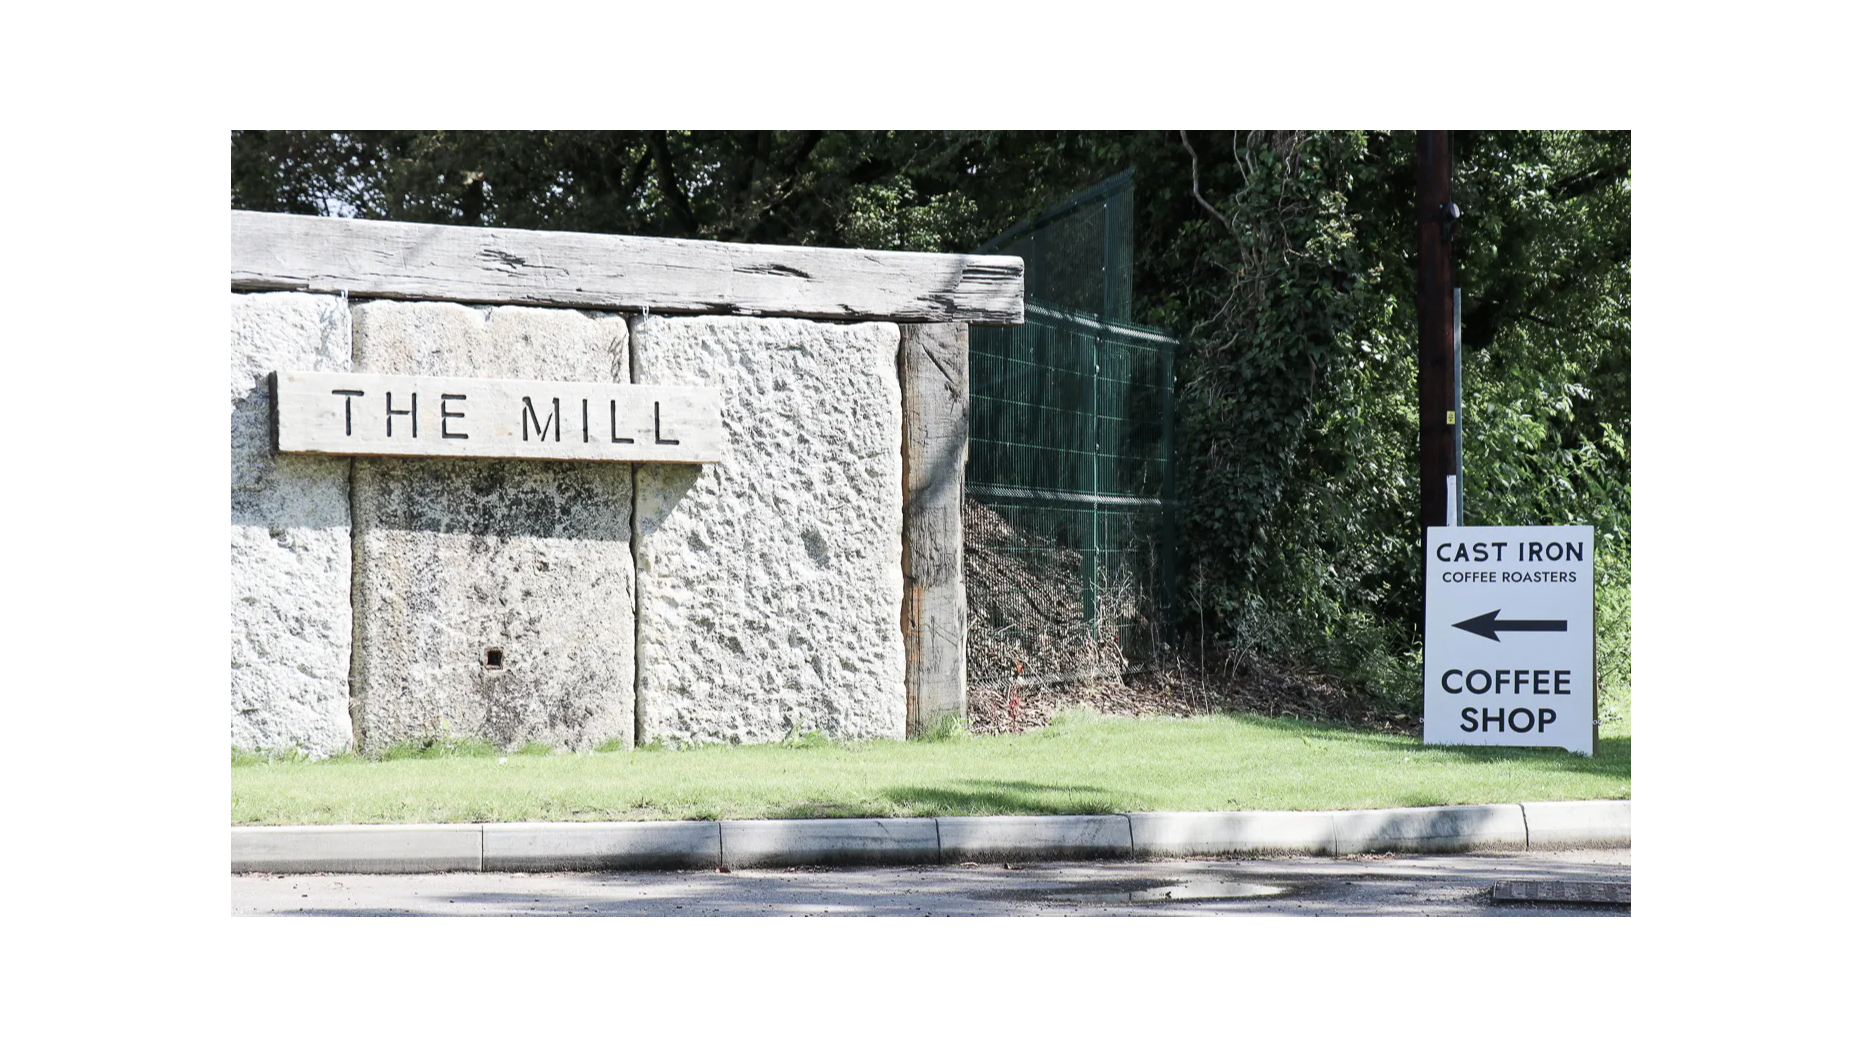 The Mill, Chichester